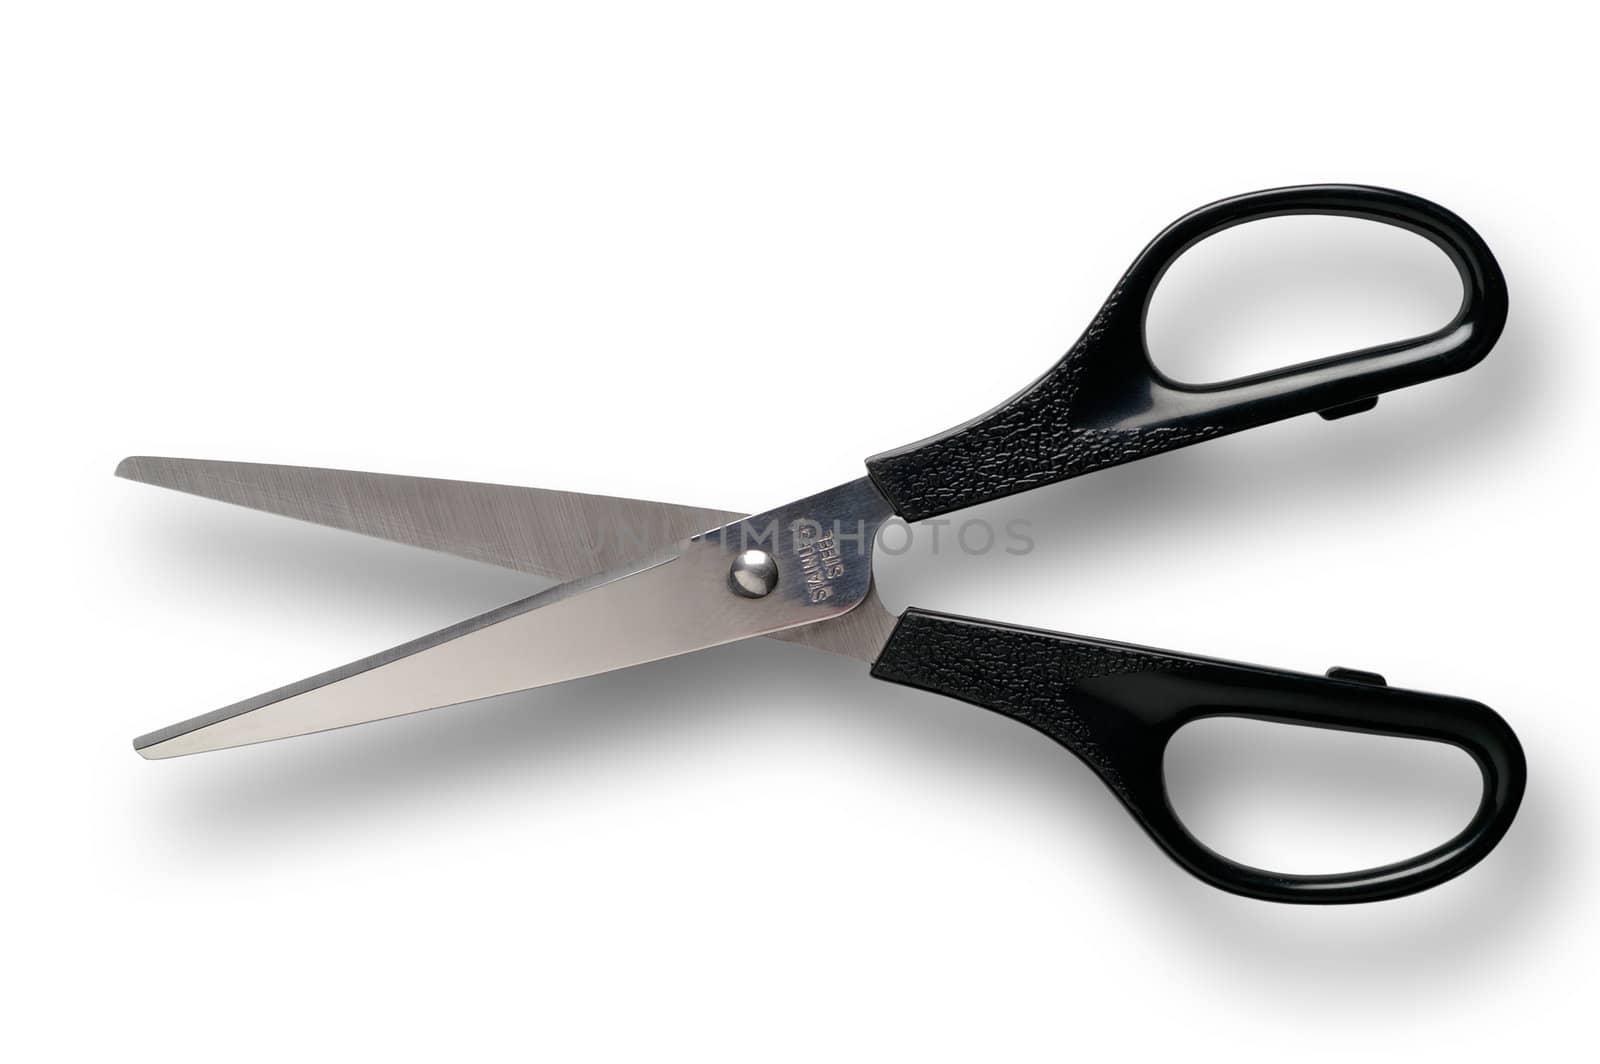 Black scissors with clipping path by Laborer